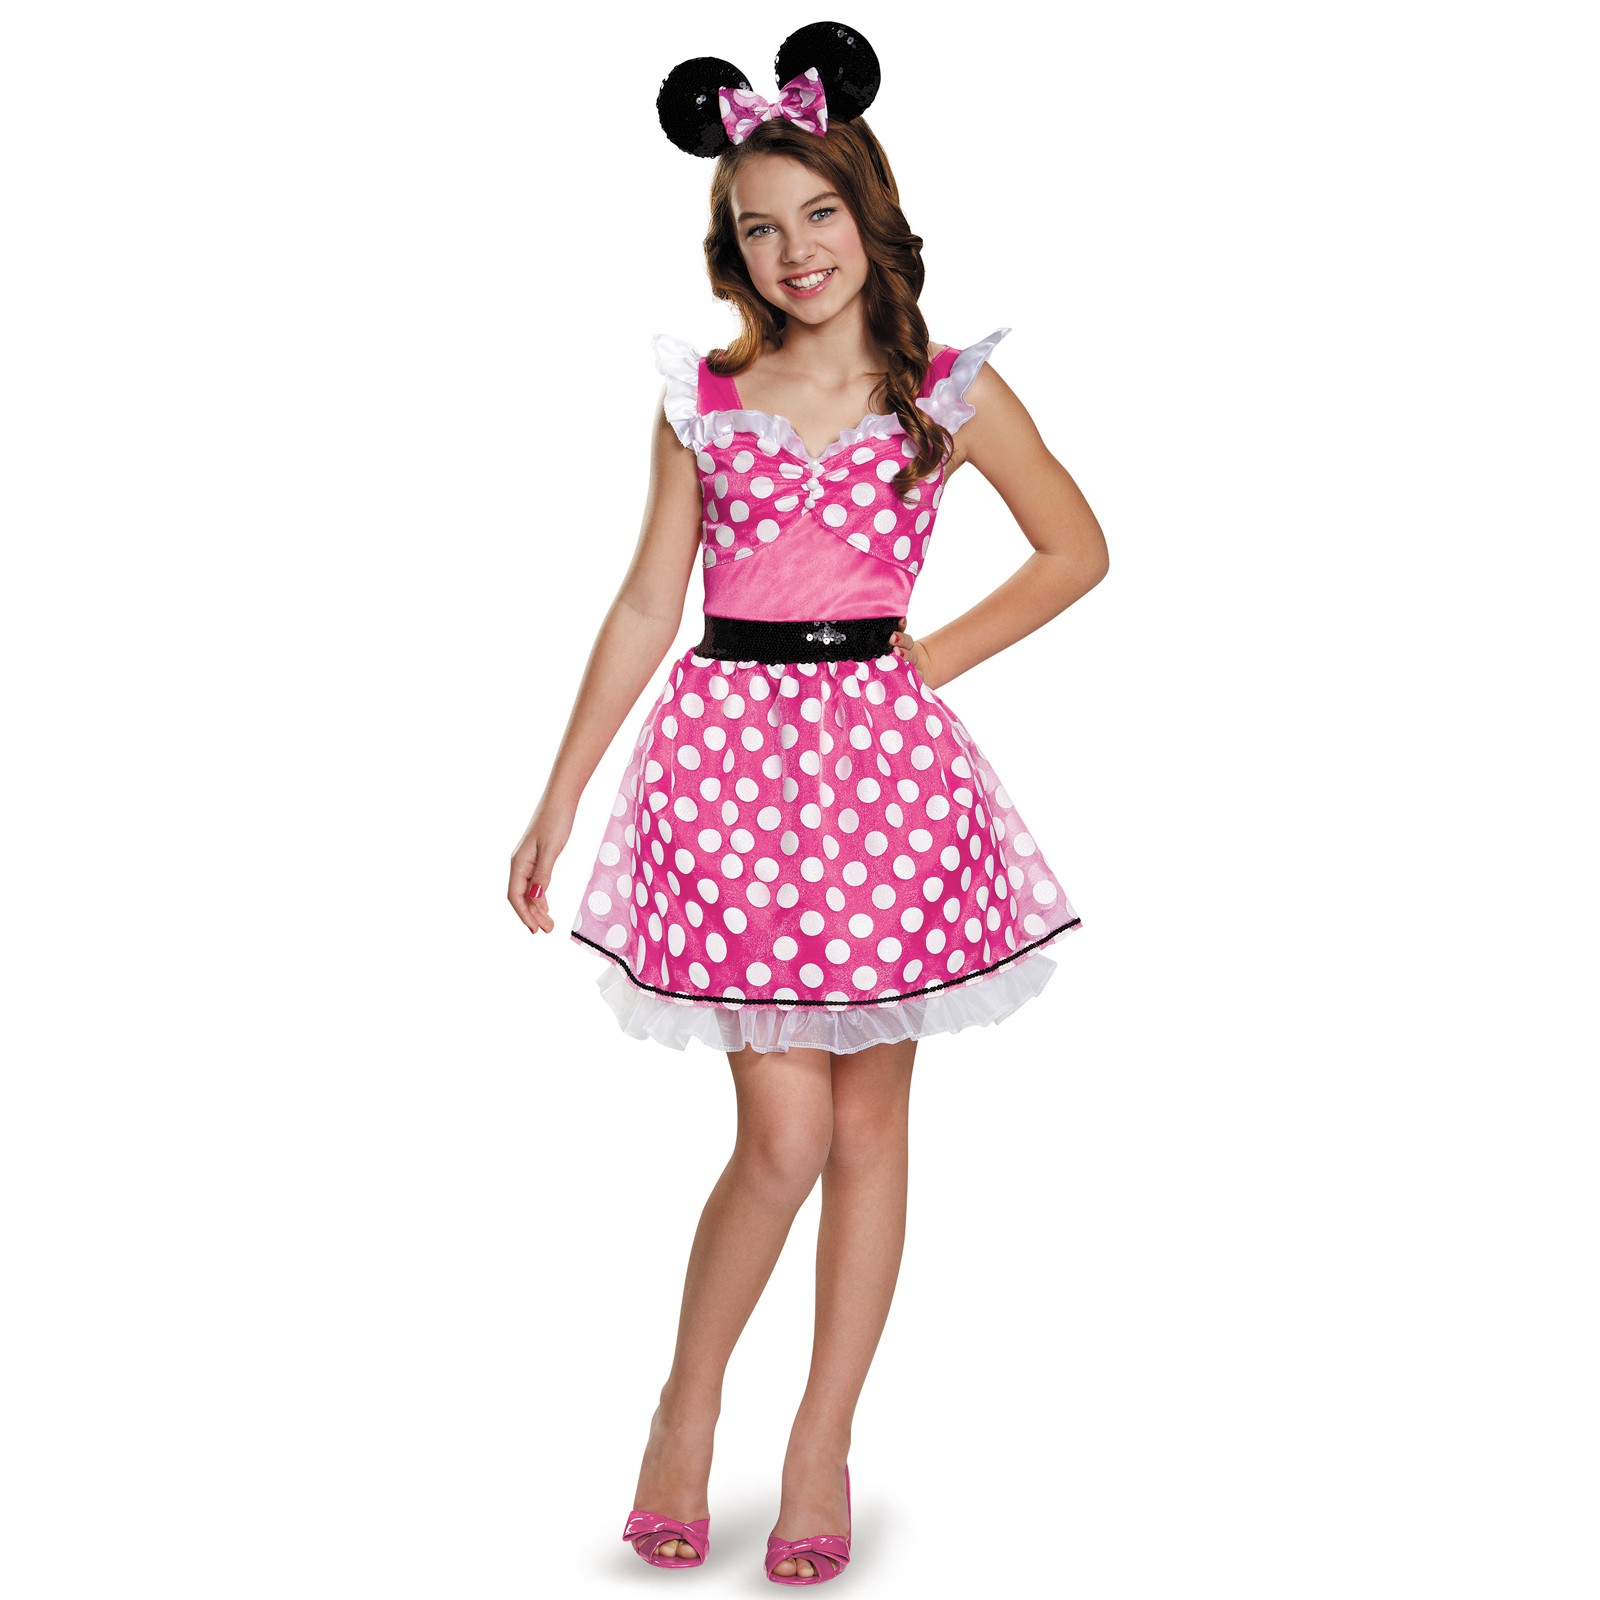 Susan G. Komen San Diego | The Best Pink Costumes for Halloween and